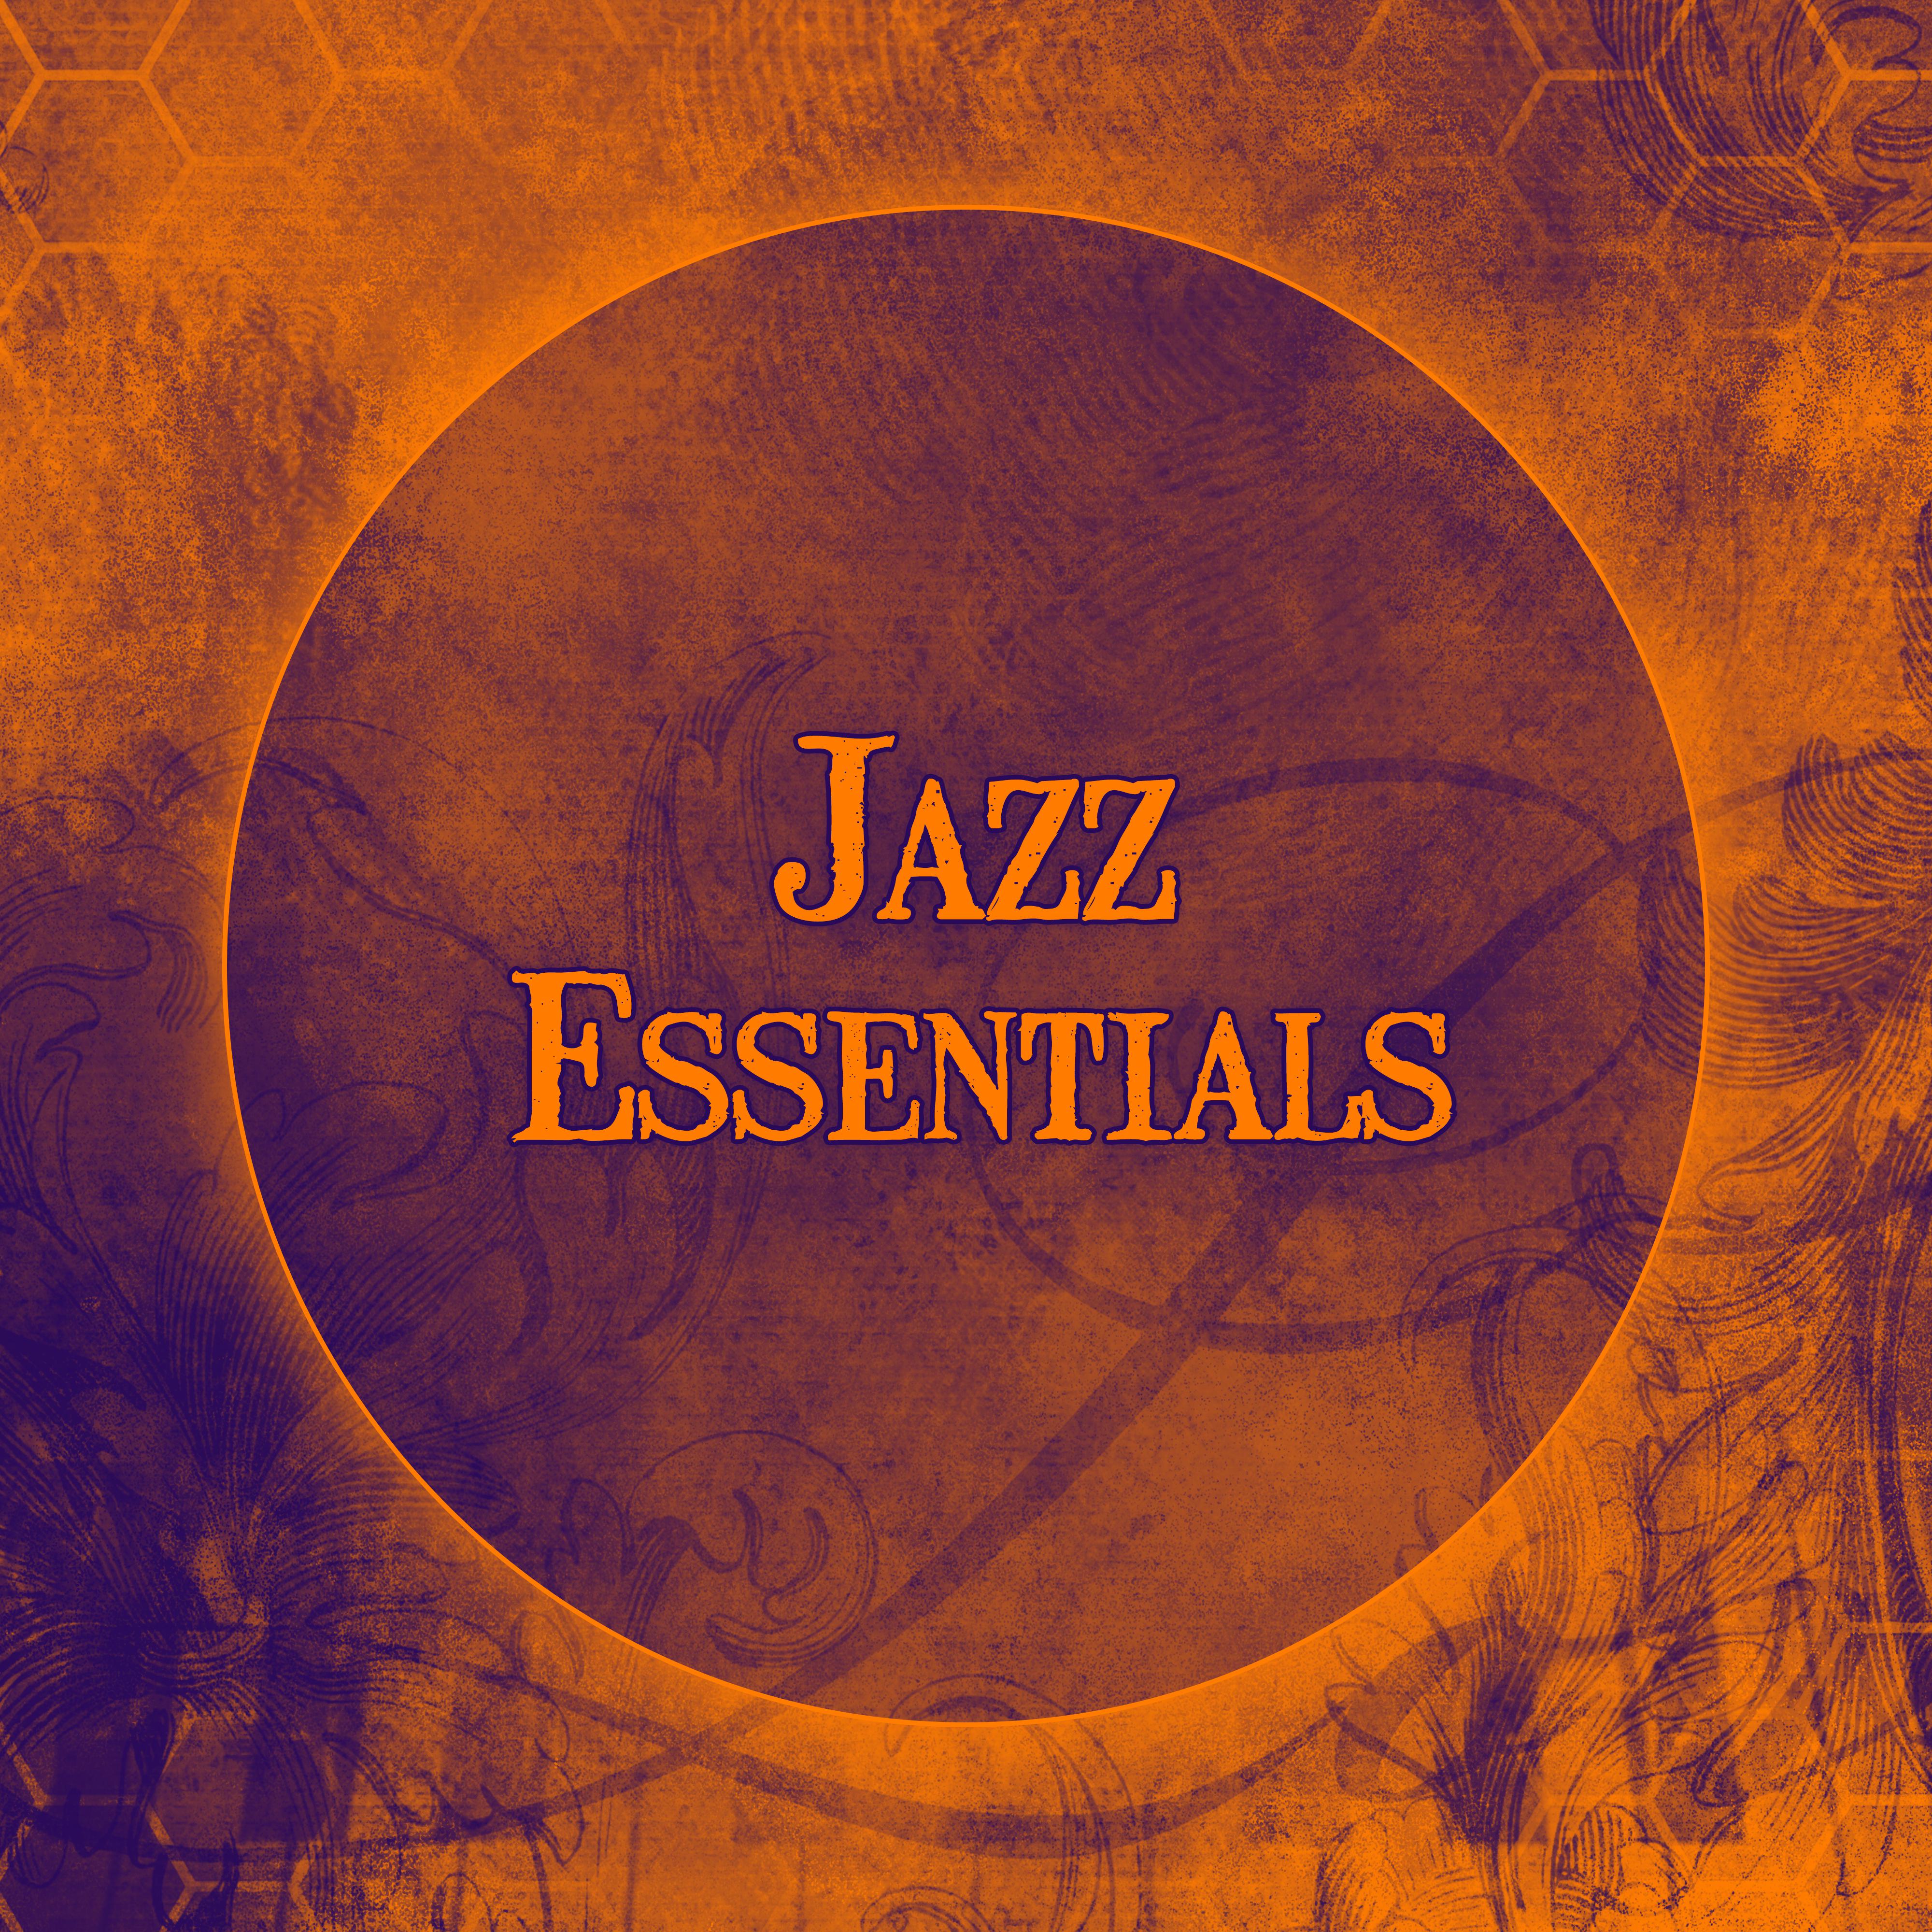 Jazz Essentials  Deep Jazz Sounds, Ambietce Relaxation, Smooth Music